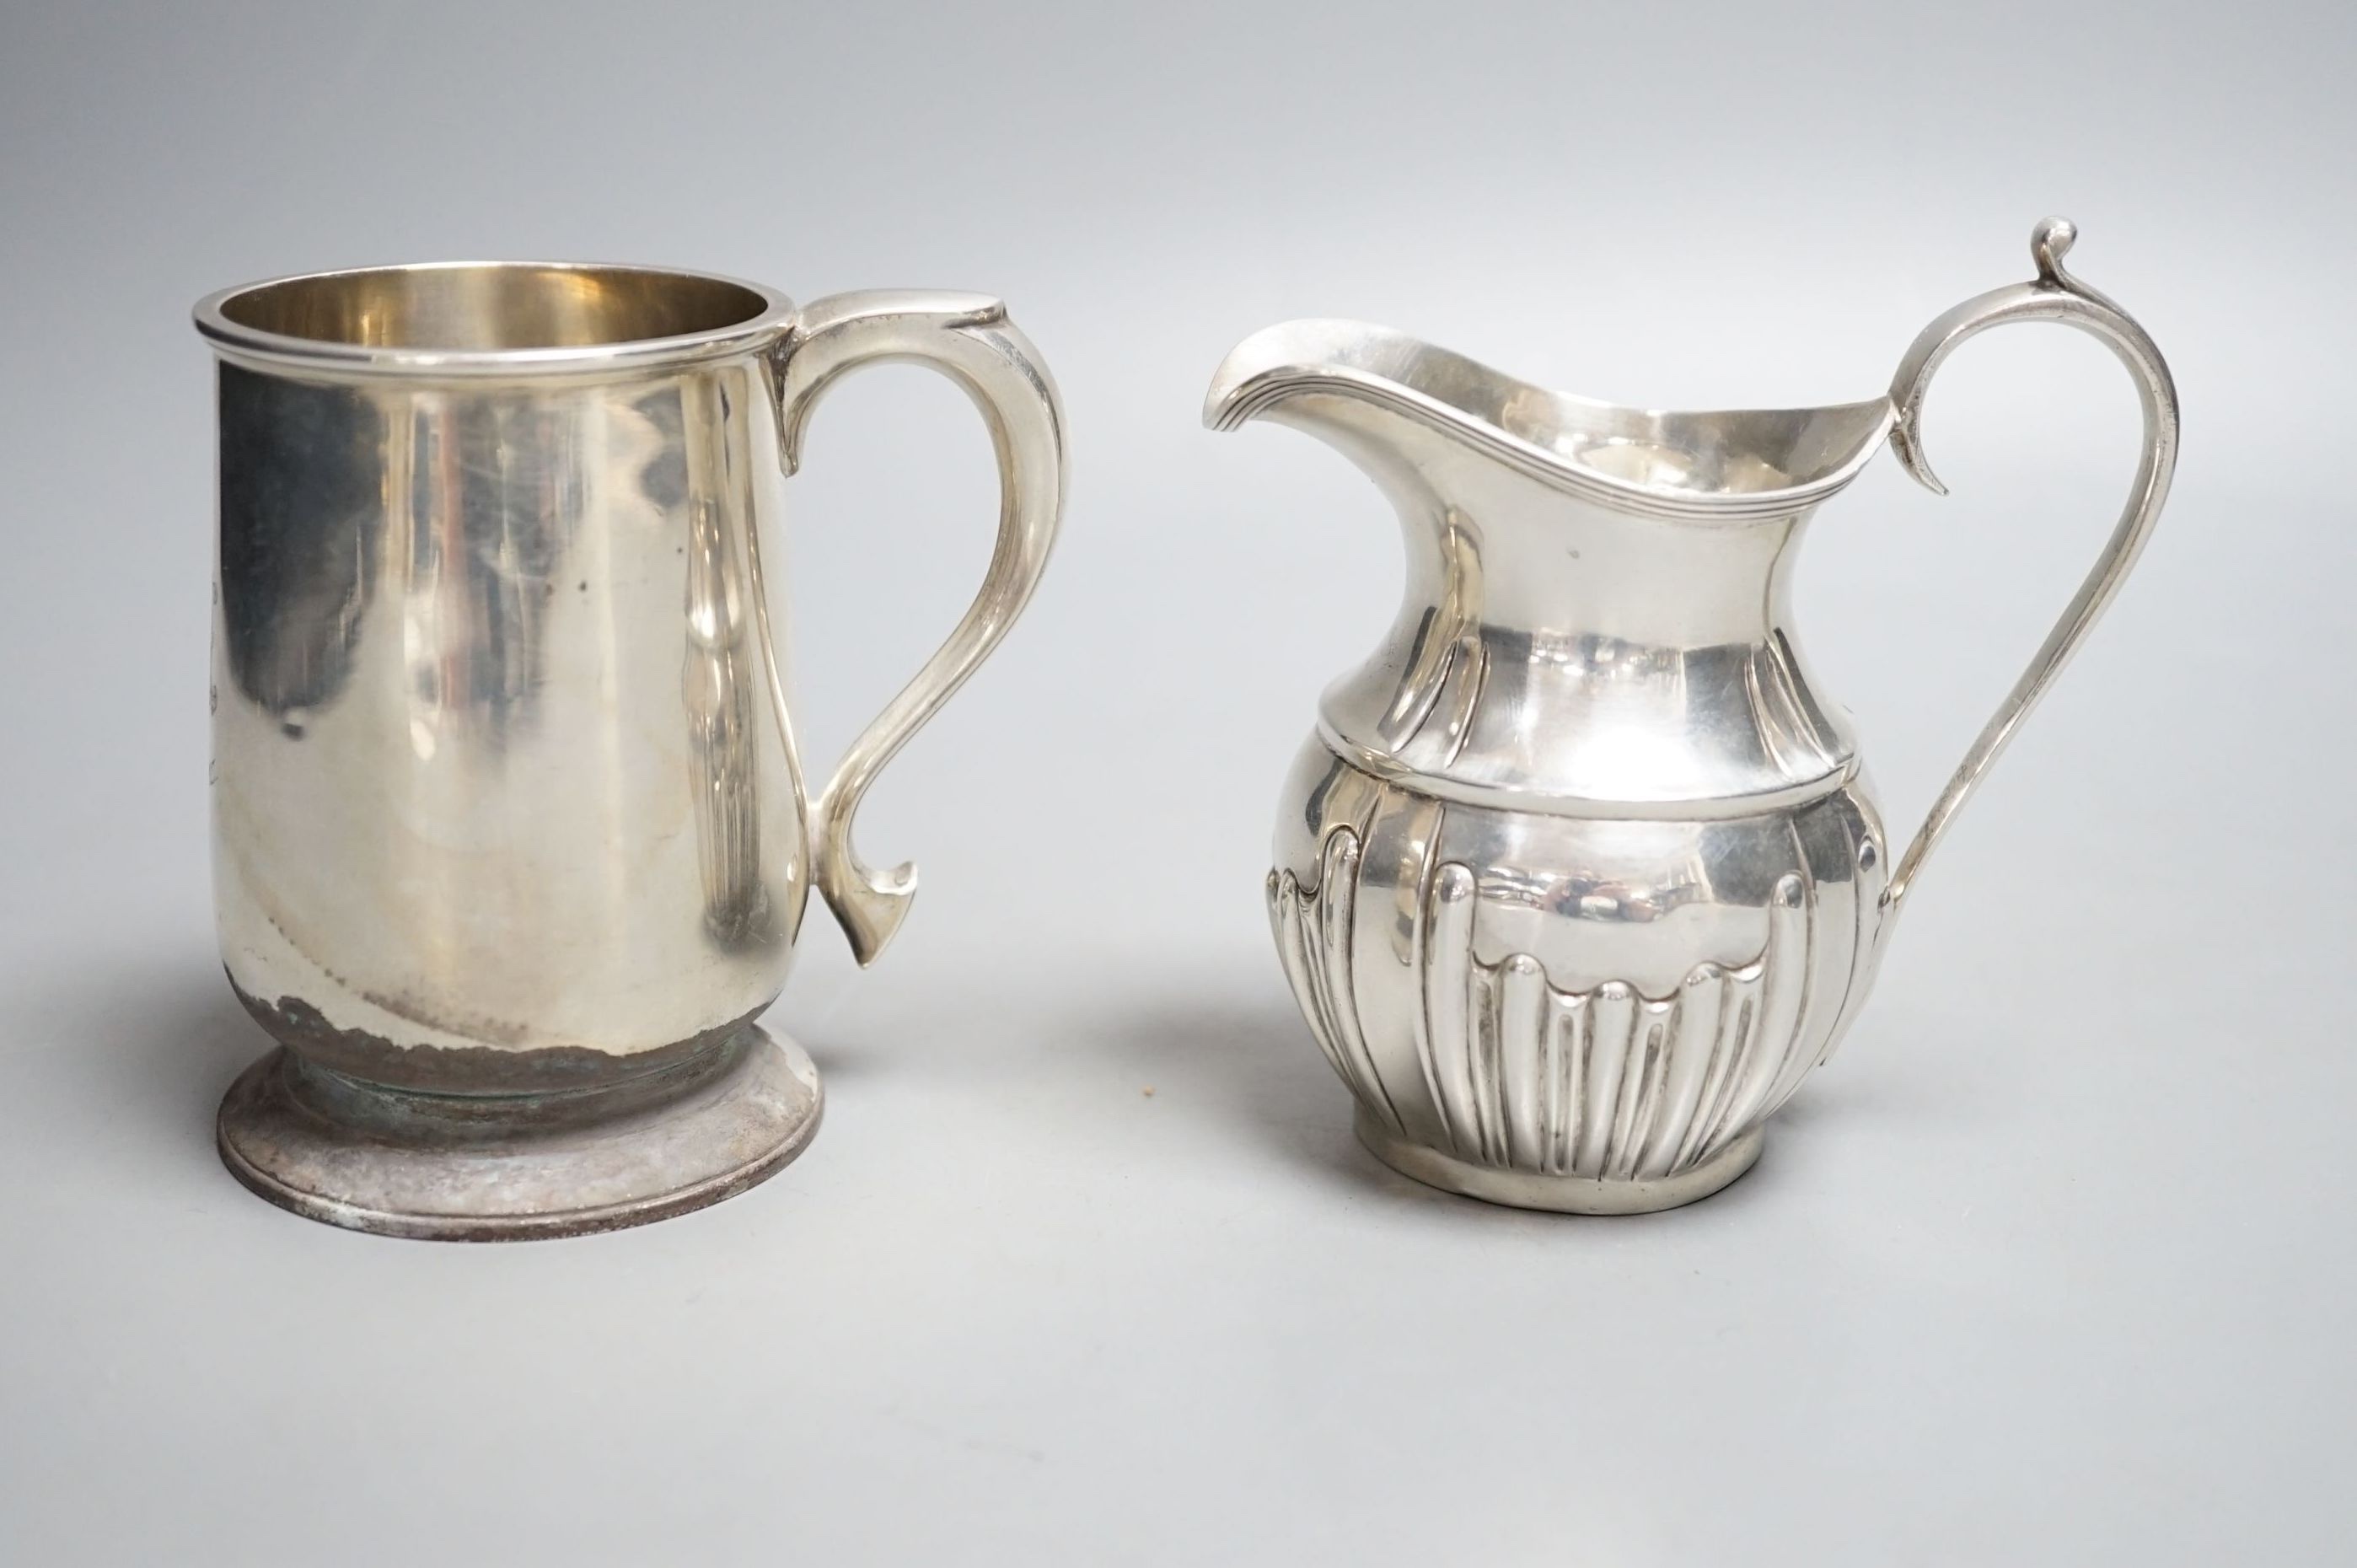 A late Victorian silver cream jug, Nathan & Hayes, Chester, 1897 and a George V silver christening mug, William Hutton & Sons, Sheffield, 1924